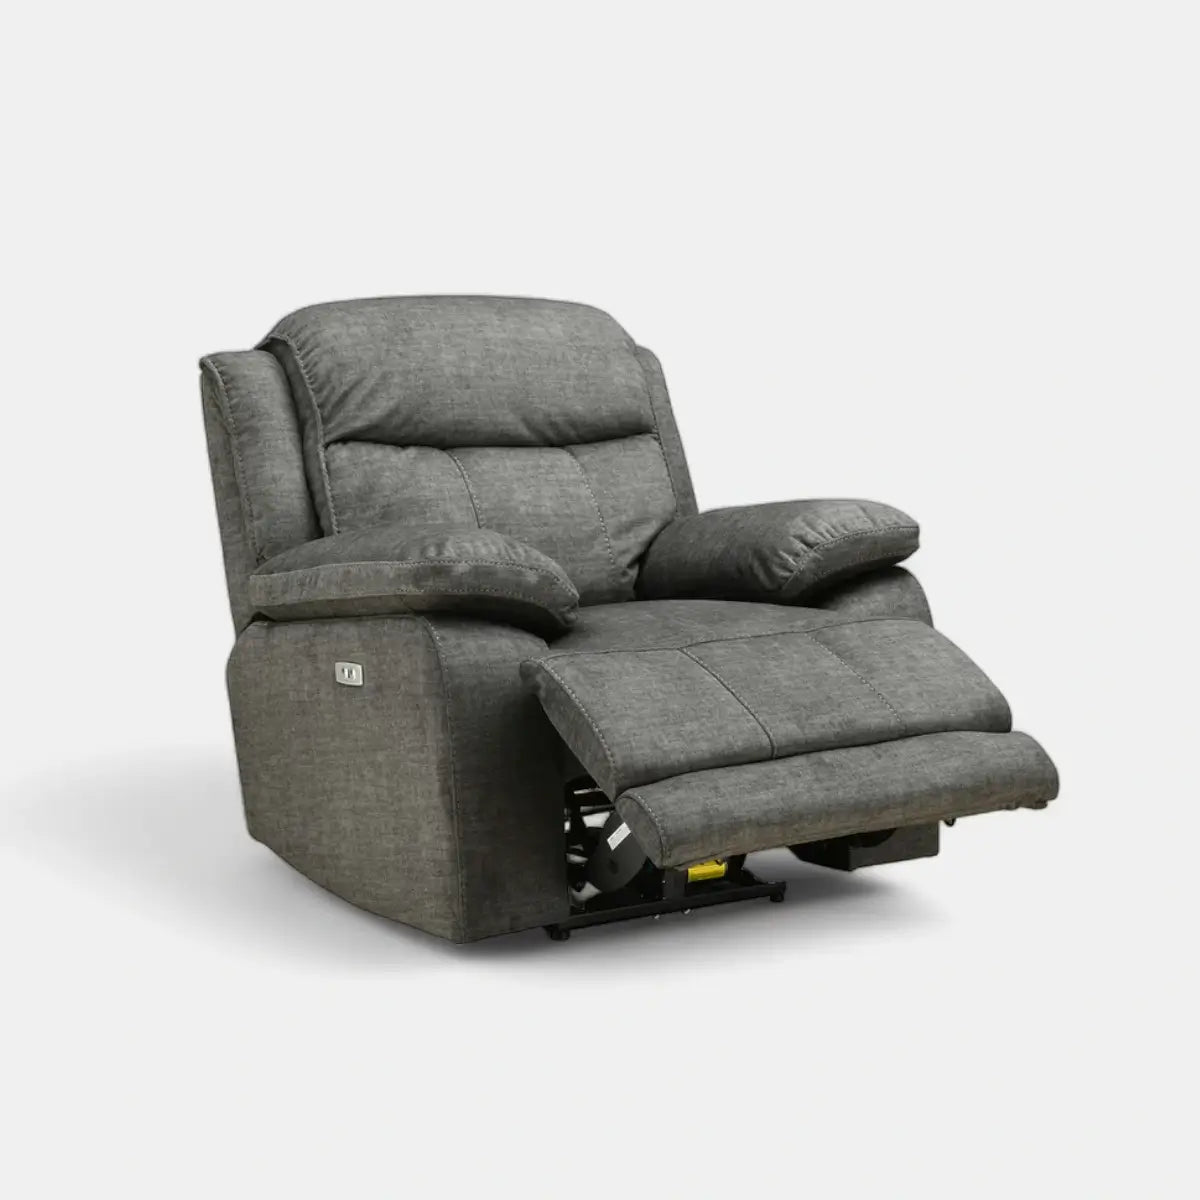 New Vermont Power Recliner Armchair with USB and Power Headrest